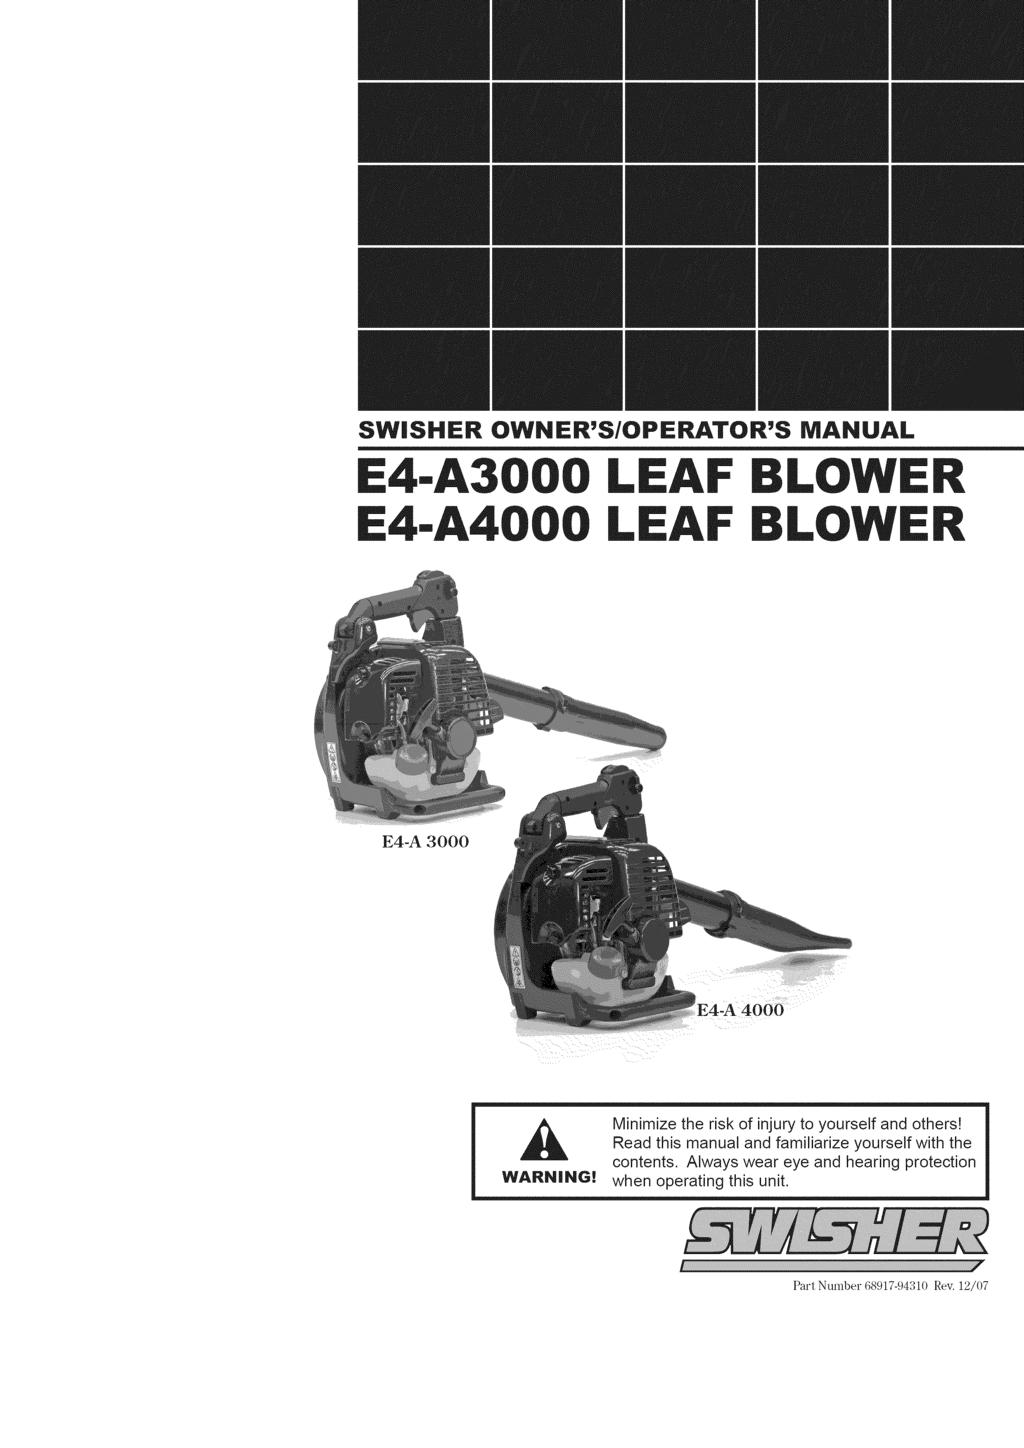 SWISHER OWNER'S/OPERATOR'S MANUAL E4-A3000 E4-A4000 I. EAF BLOWER I. EAF BLOWER E4-A 3000... '_'i!i Minimize the risk of injury to yourself and others!